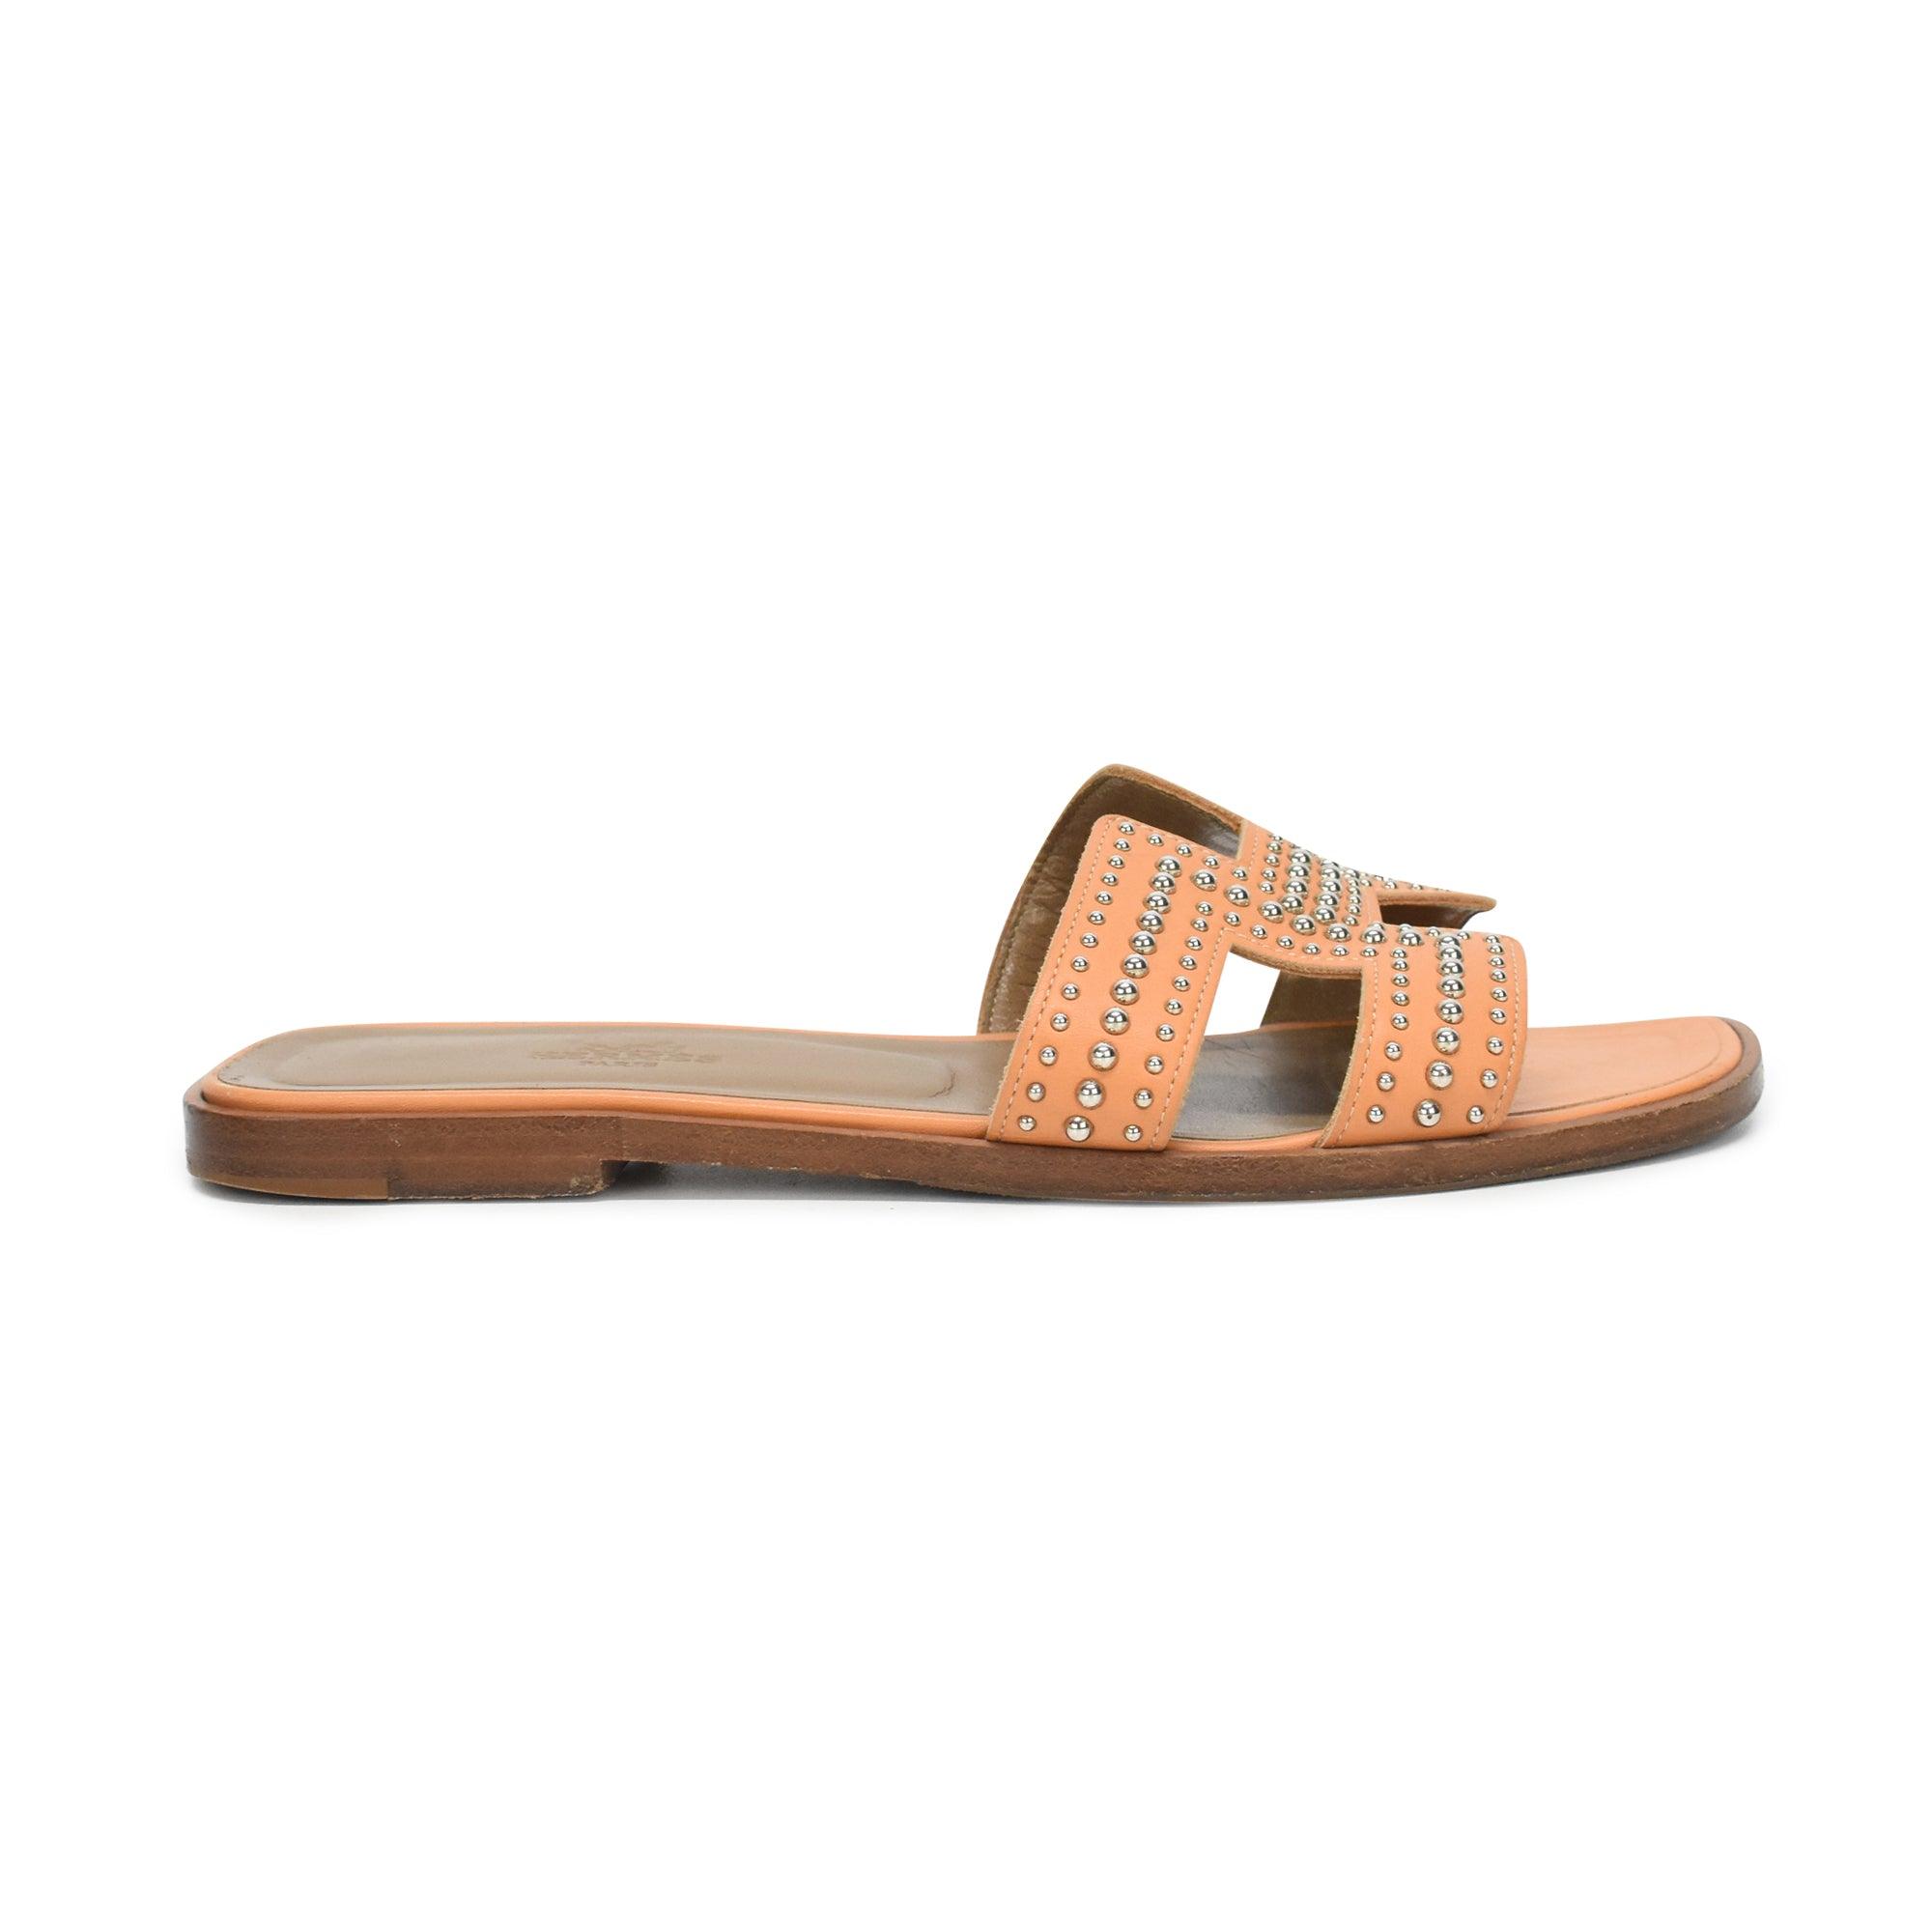 Hermes 'Oran' Sandals - Women's 36.5 - Fashionably Yours